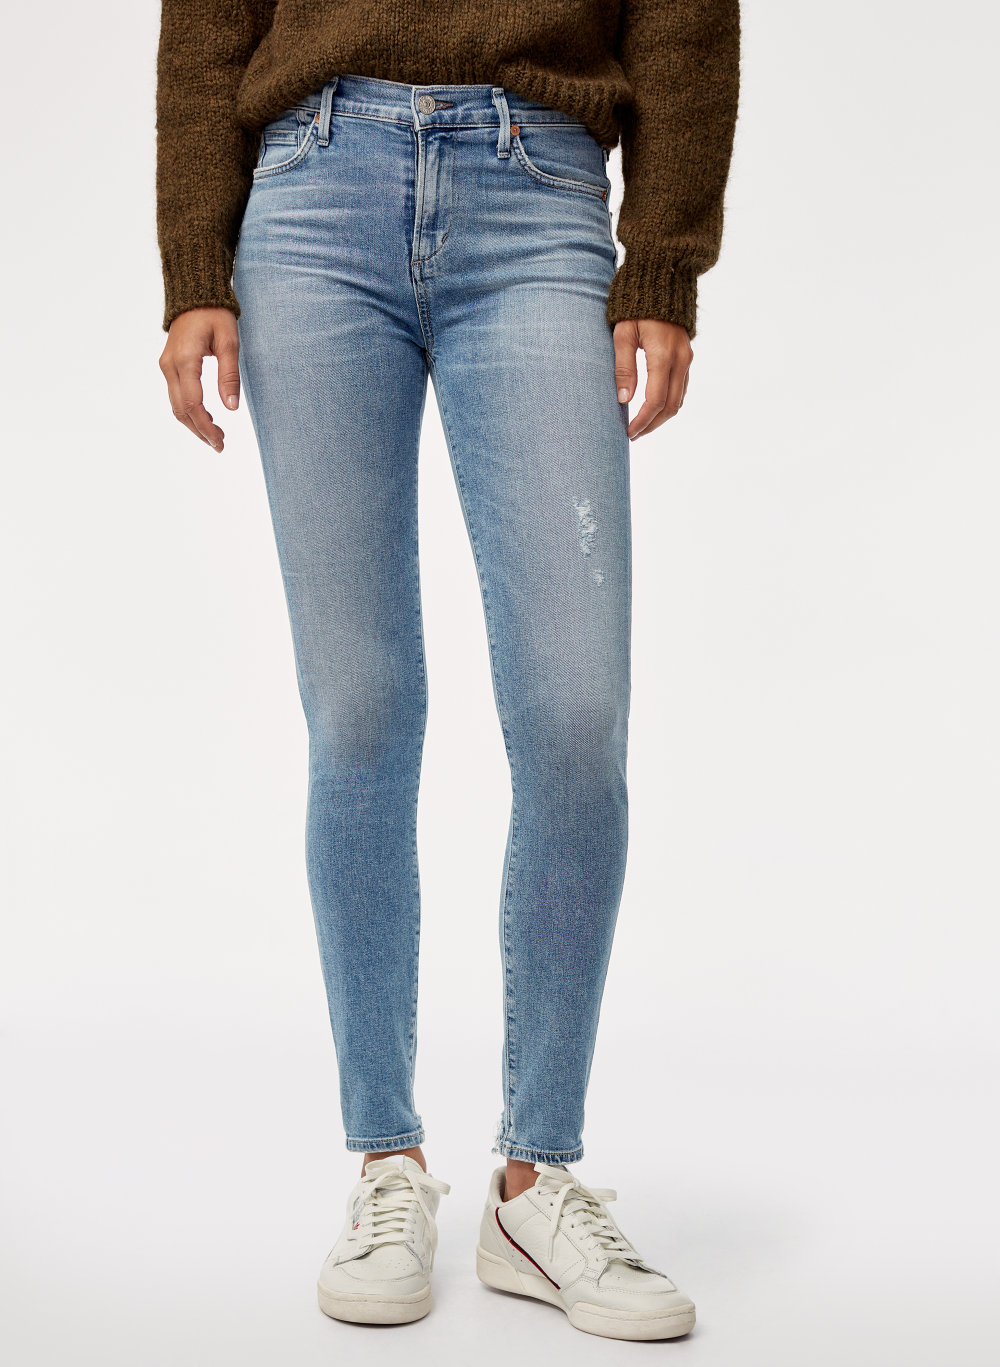 westbound bootcut jeans